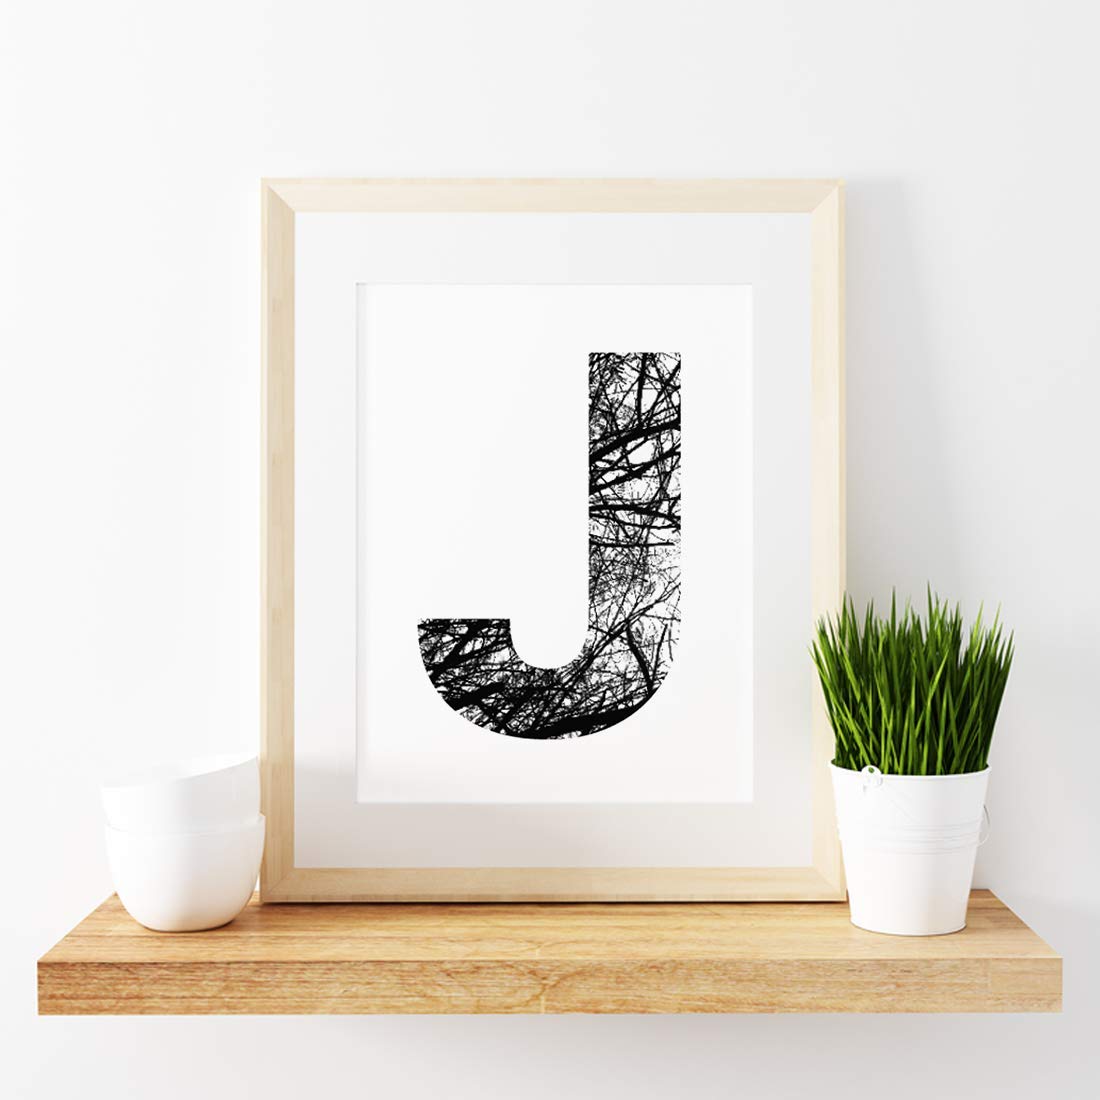 Andaz Press Minimalist Black and White Wall Art Print Poster, Tree Branches Nature Photography, Monogram Initial Letter J, 8.5x11-inch Sign, 1-Pack, Bedroom Living Room Office Decor